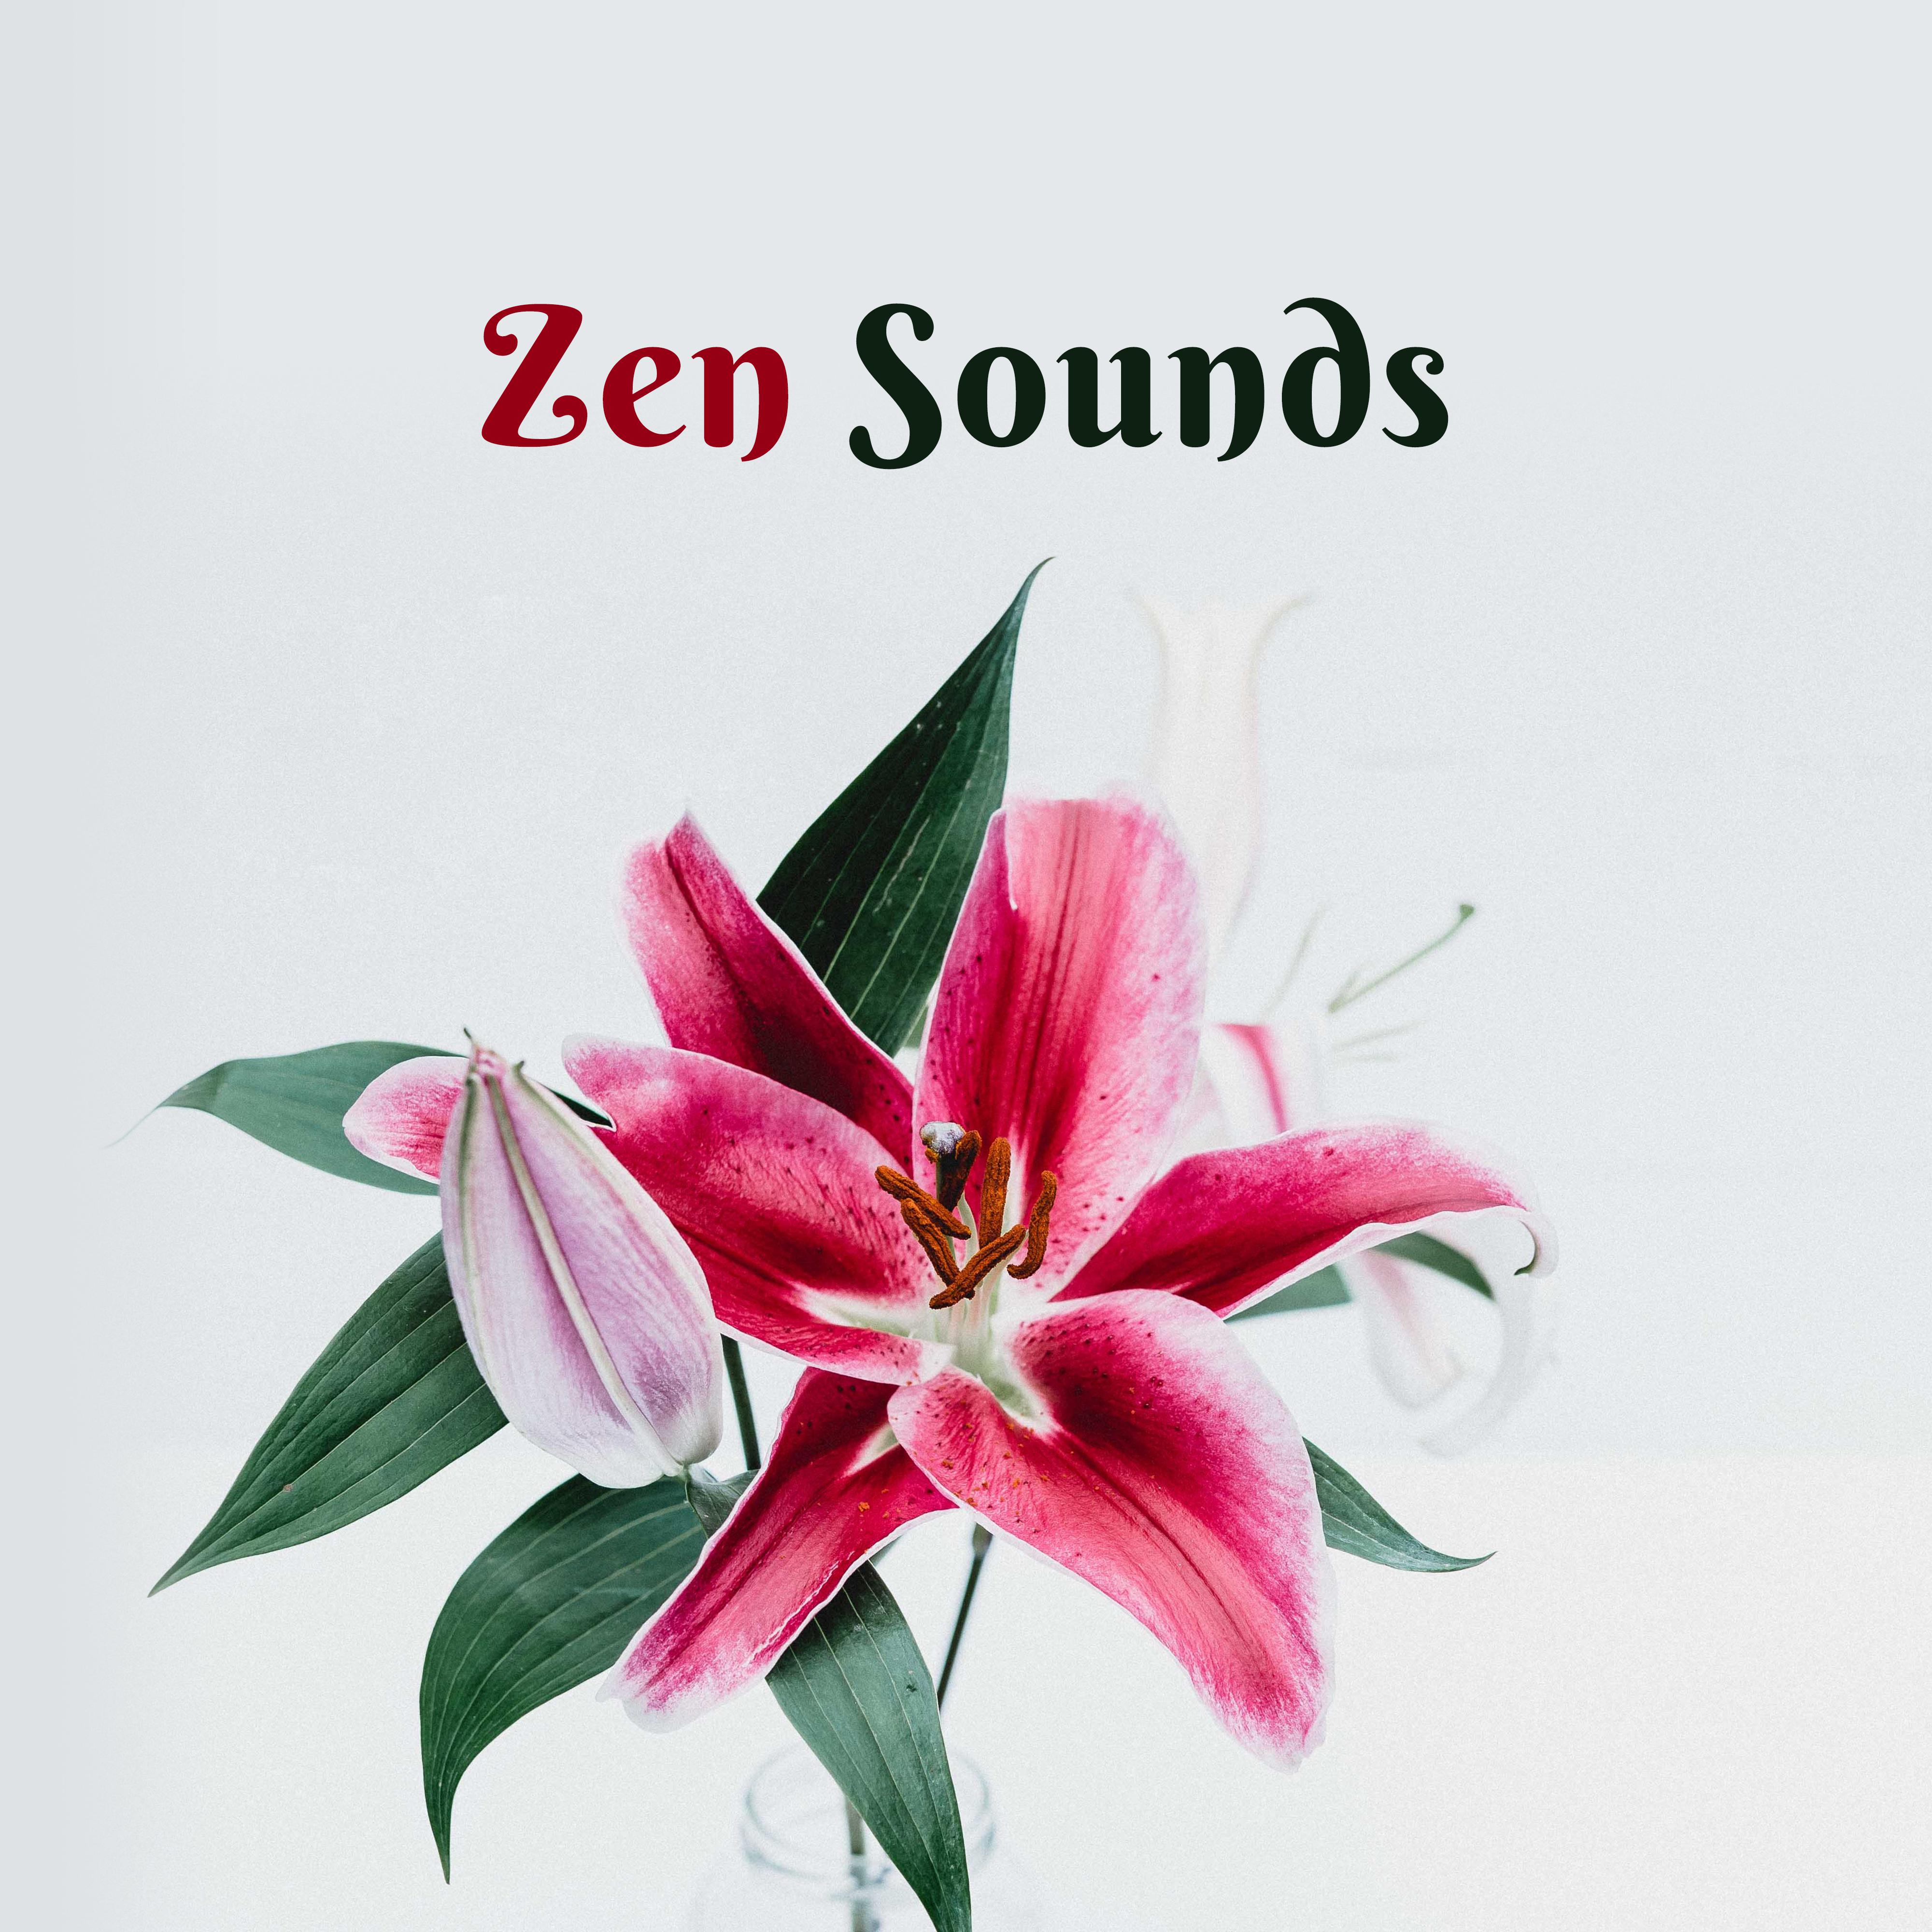 Zen Sounds – Deep Sleep, Healing Music to Rest, Pure Relaxation, Inner Harmony, Tranquility